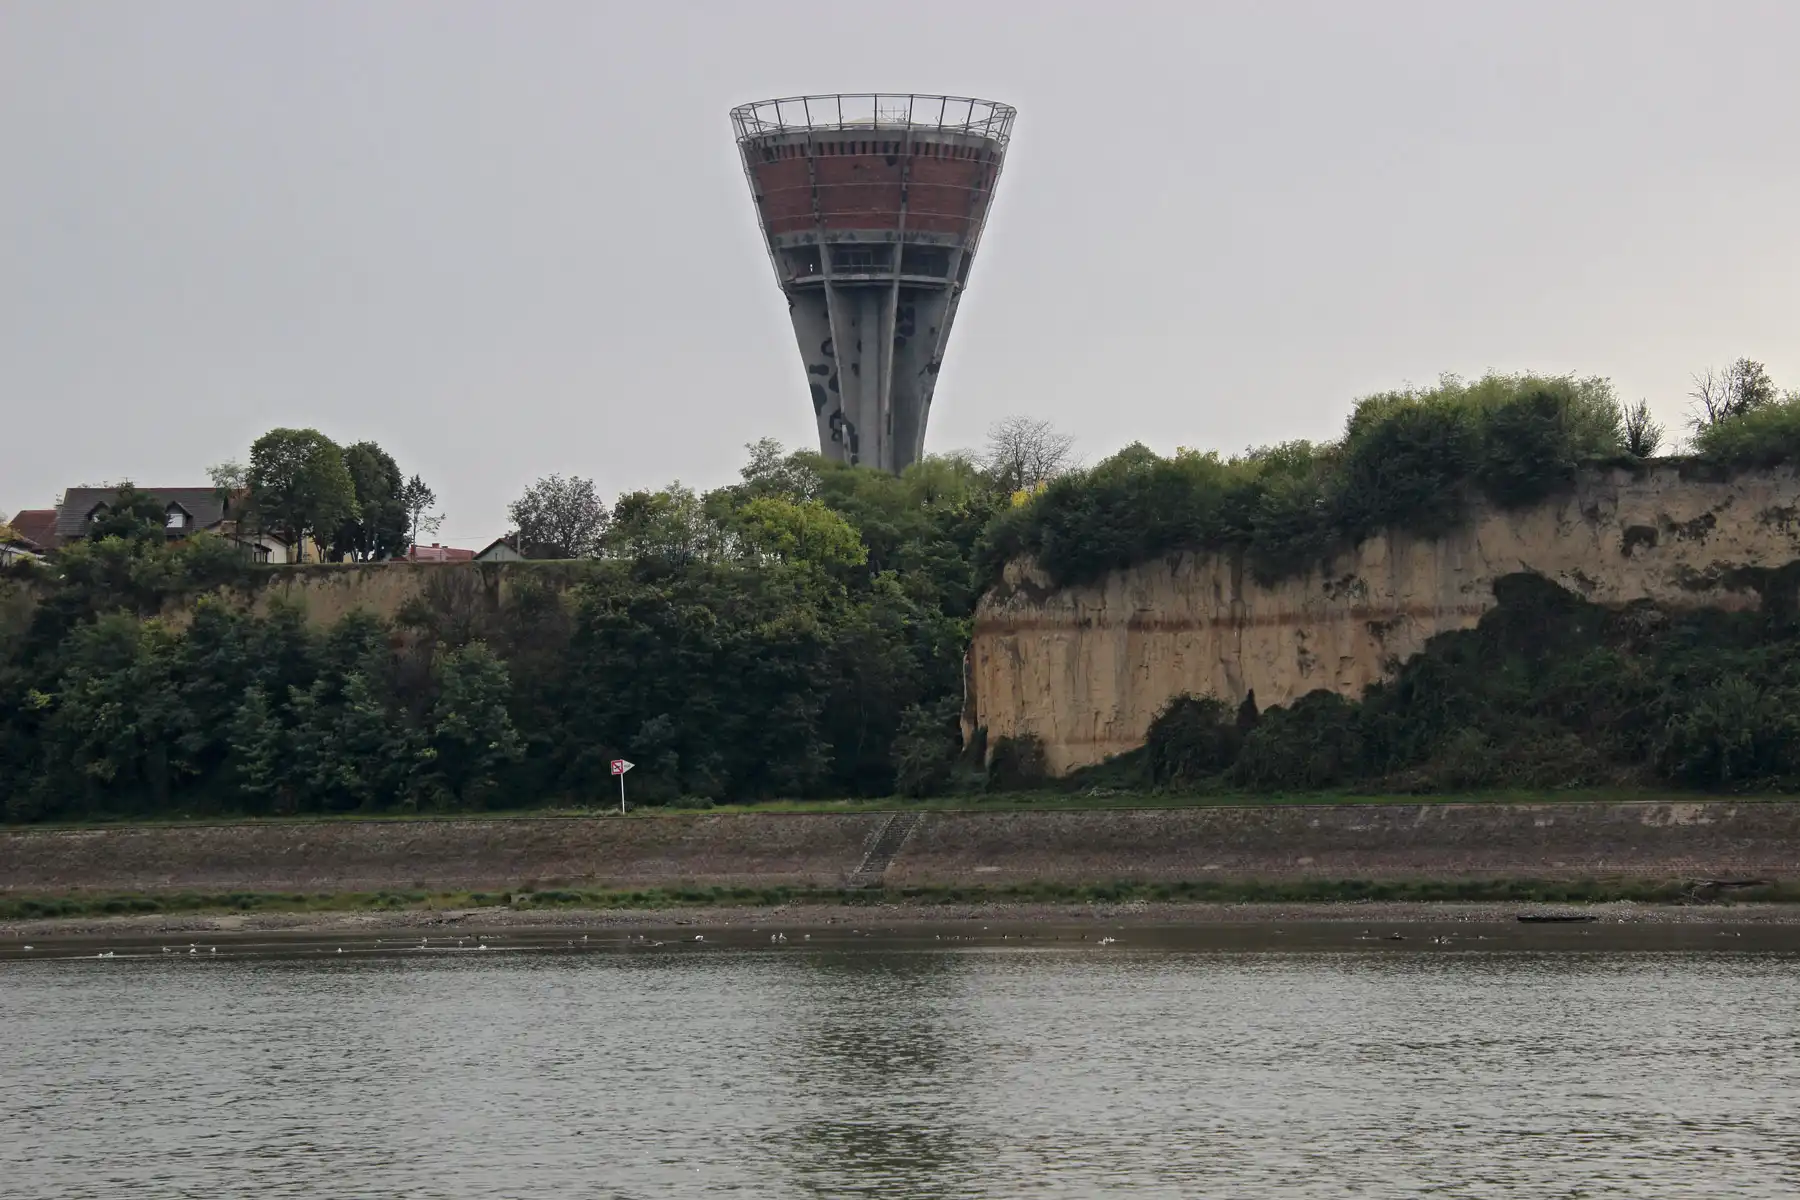 tour guide:Vukovar-The Water tower